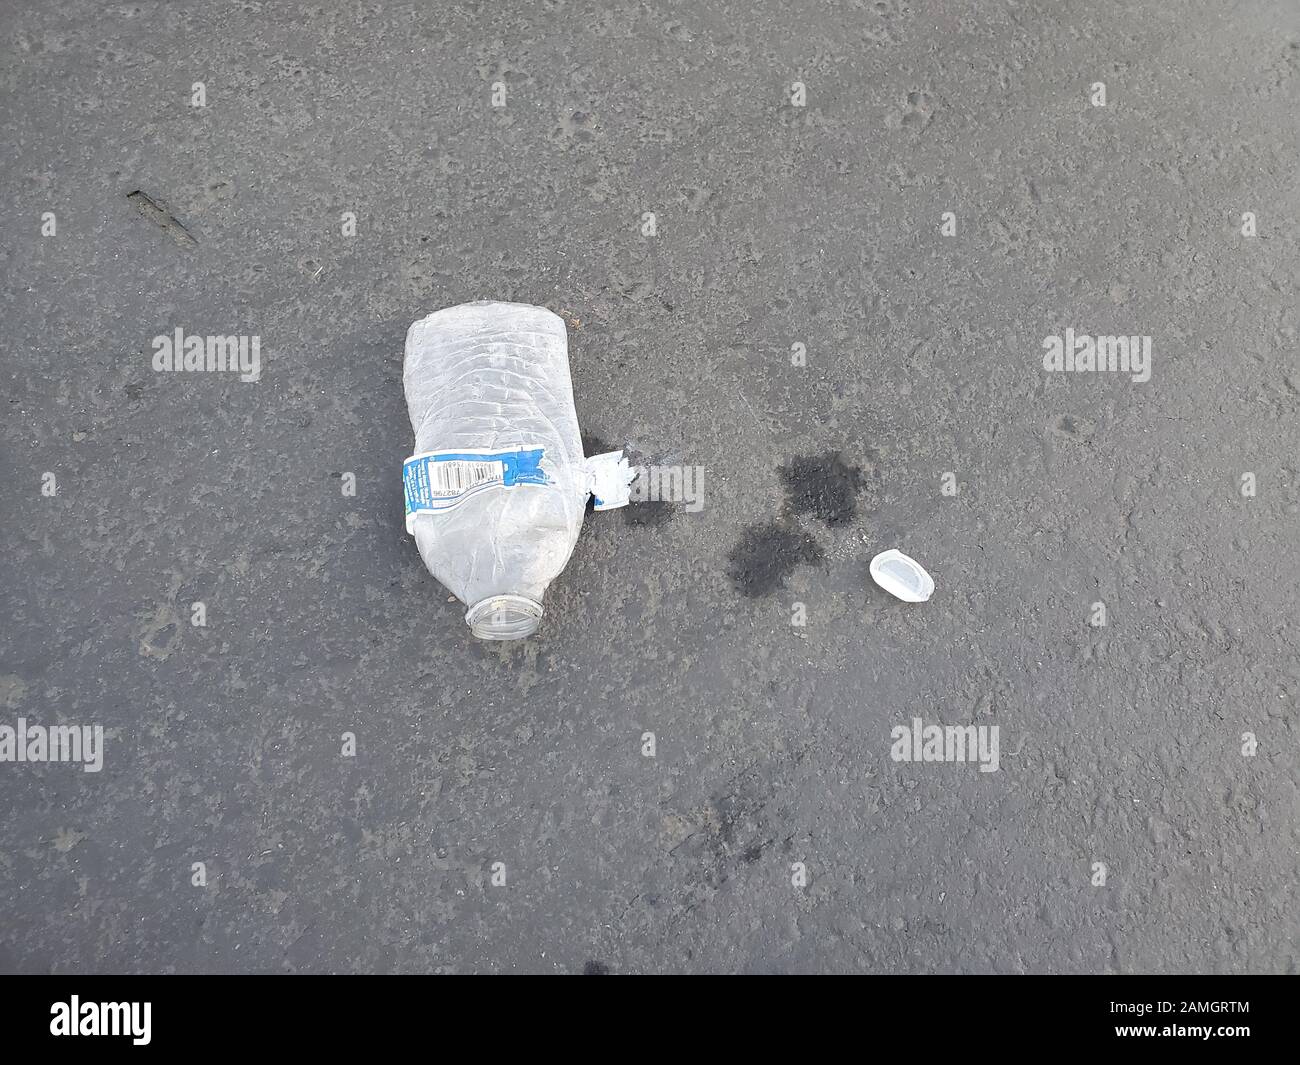 Close-up of crushed plastic water bottle on road surface, an example of plastic litter pollution, San Ramon, California, January 3, 2020. An increasing public awareness of ocean pollution by plastic waste has led to efforts to reduce single use plastics including water bottles. () Stock Photo